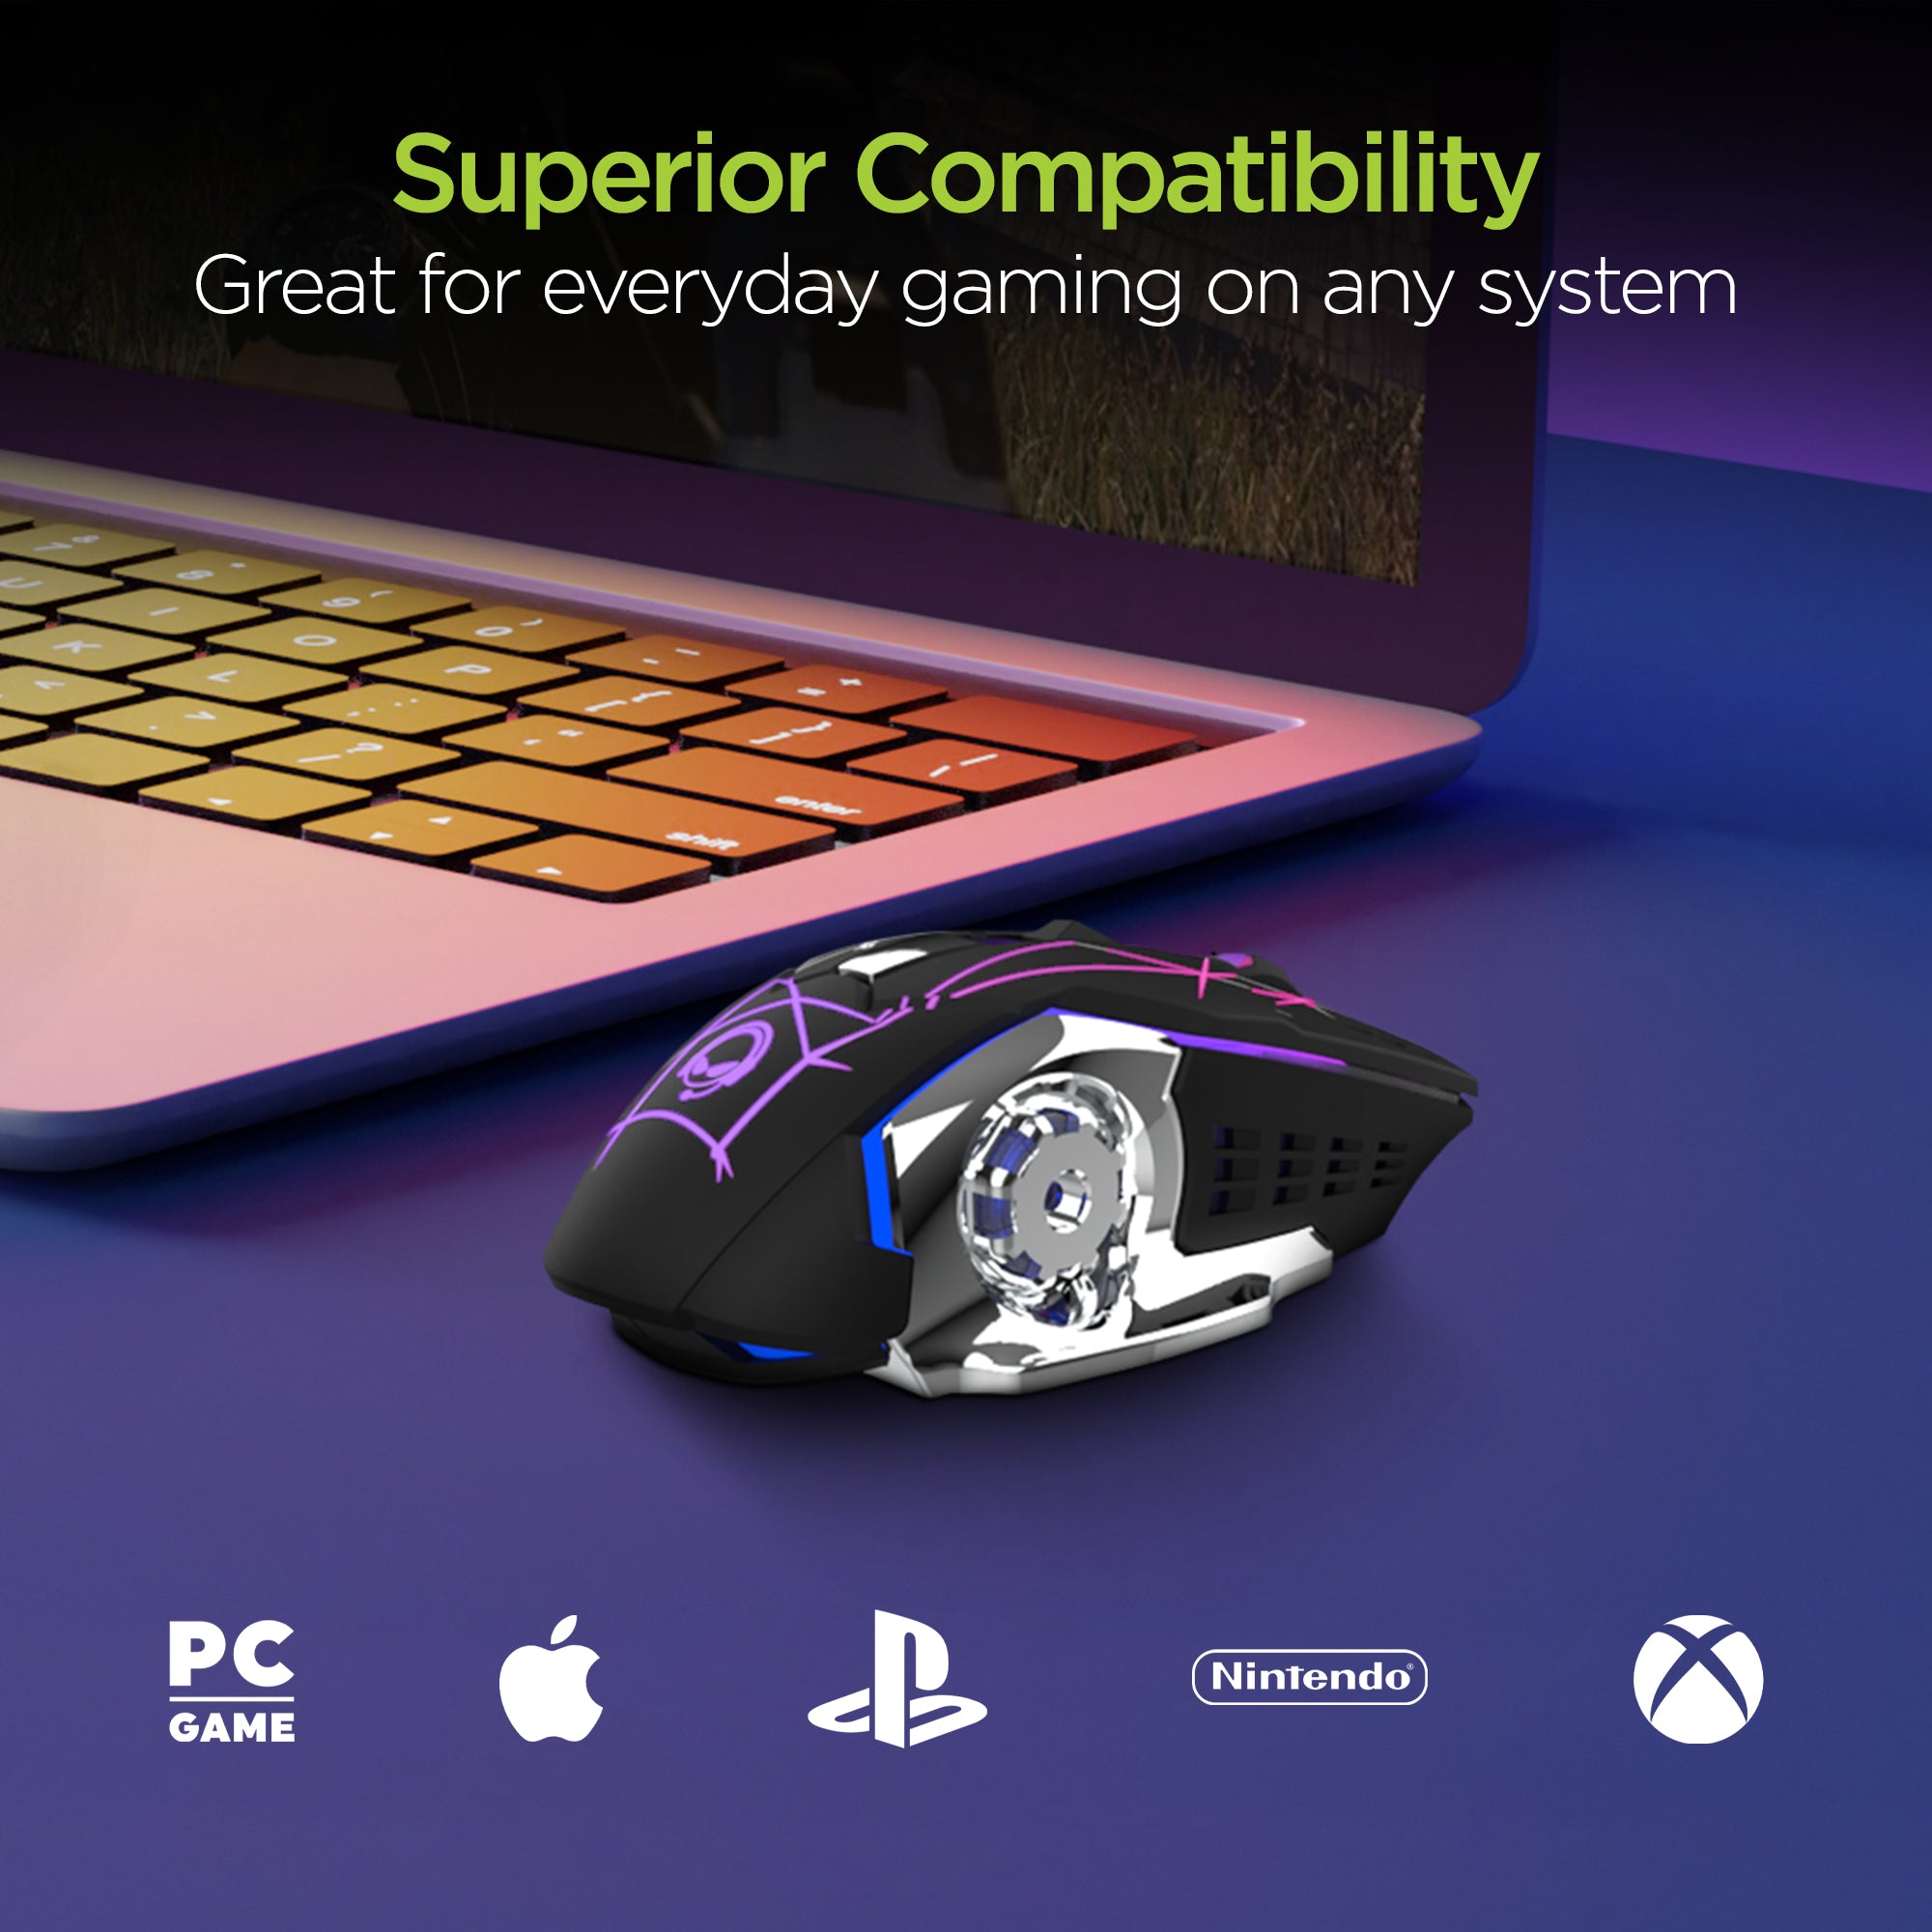 HyperGear Chromium Wireless Gaming Mouse